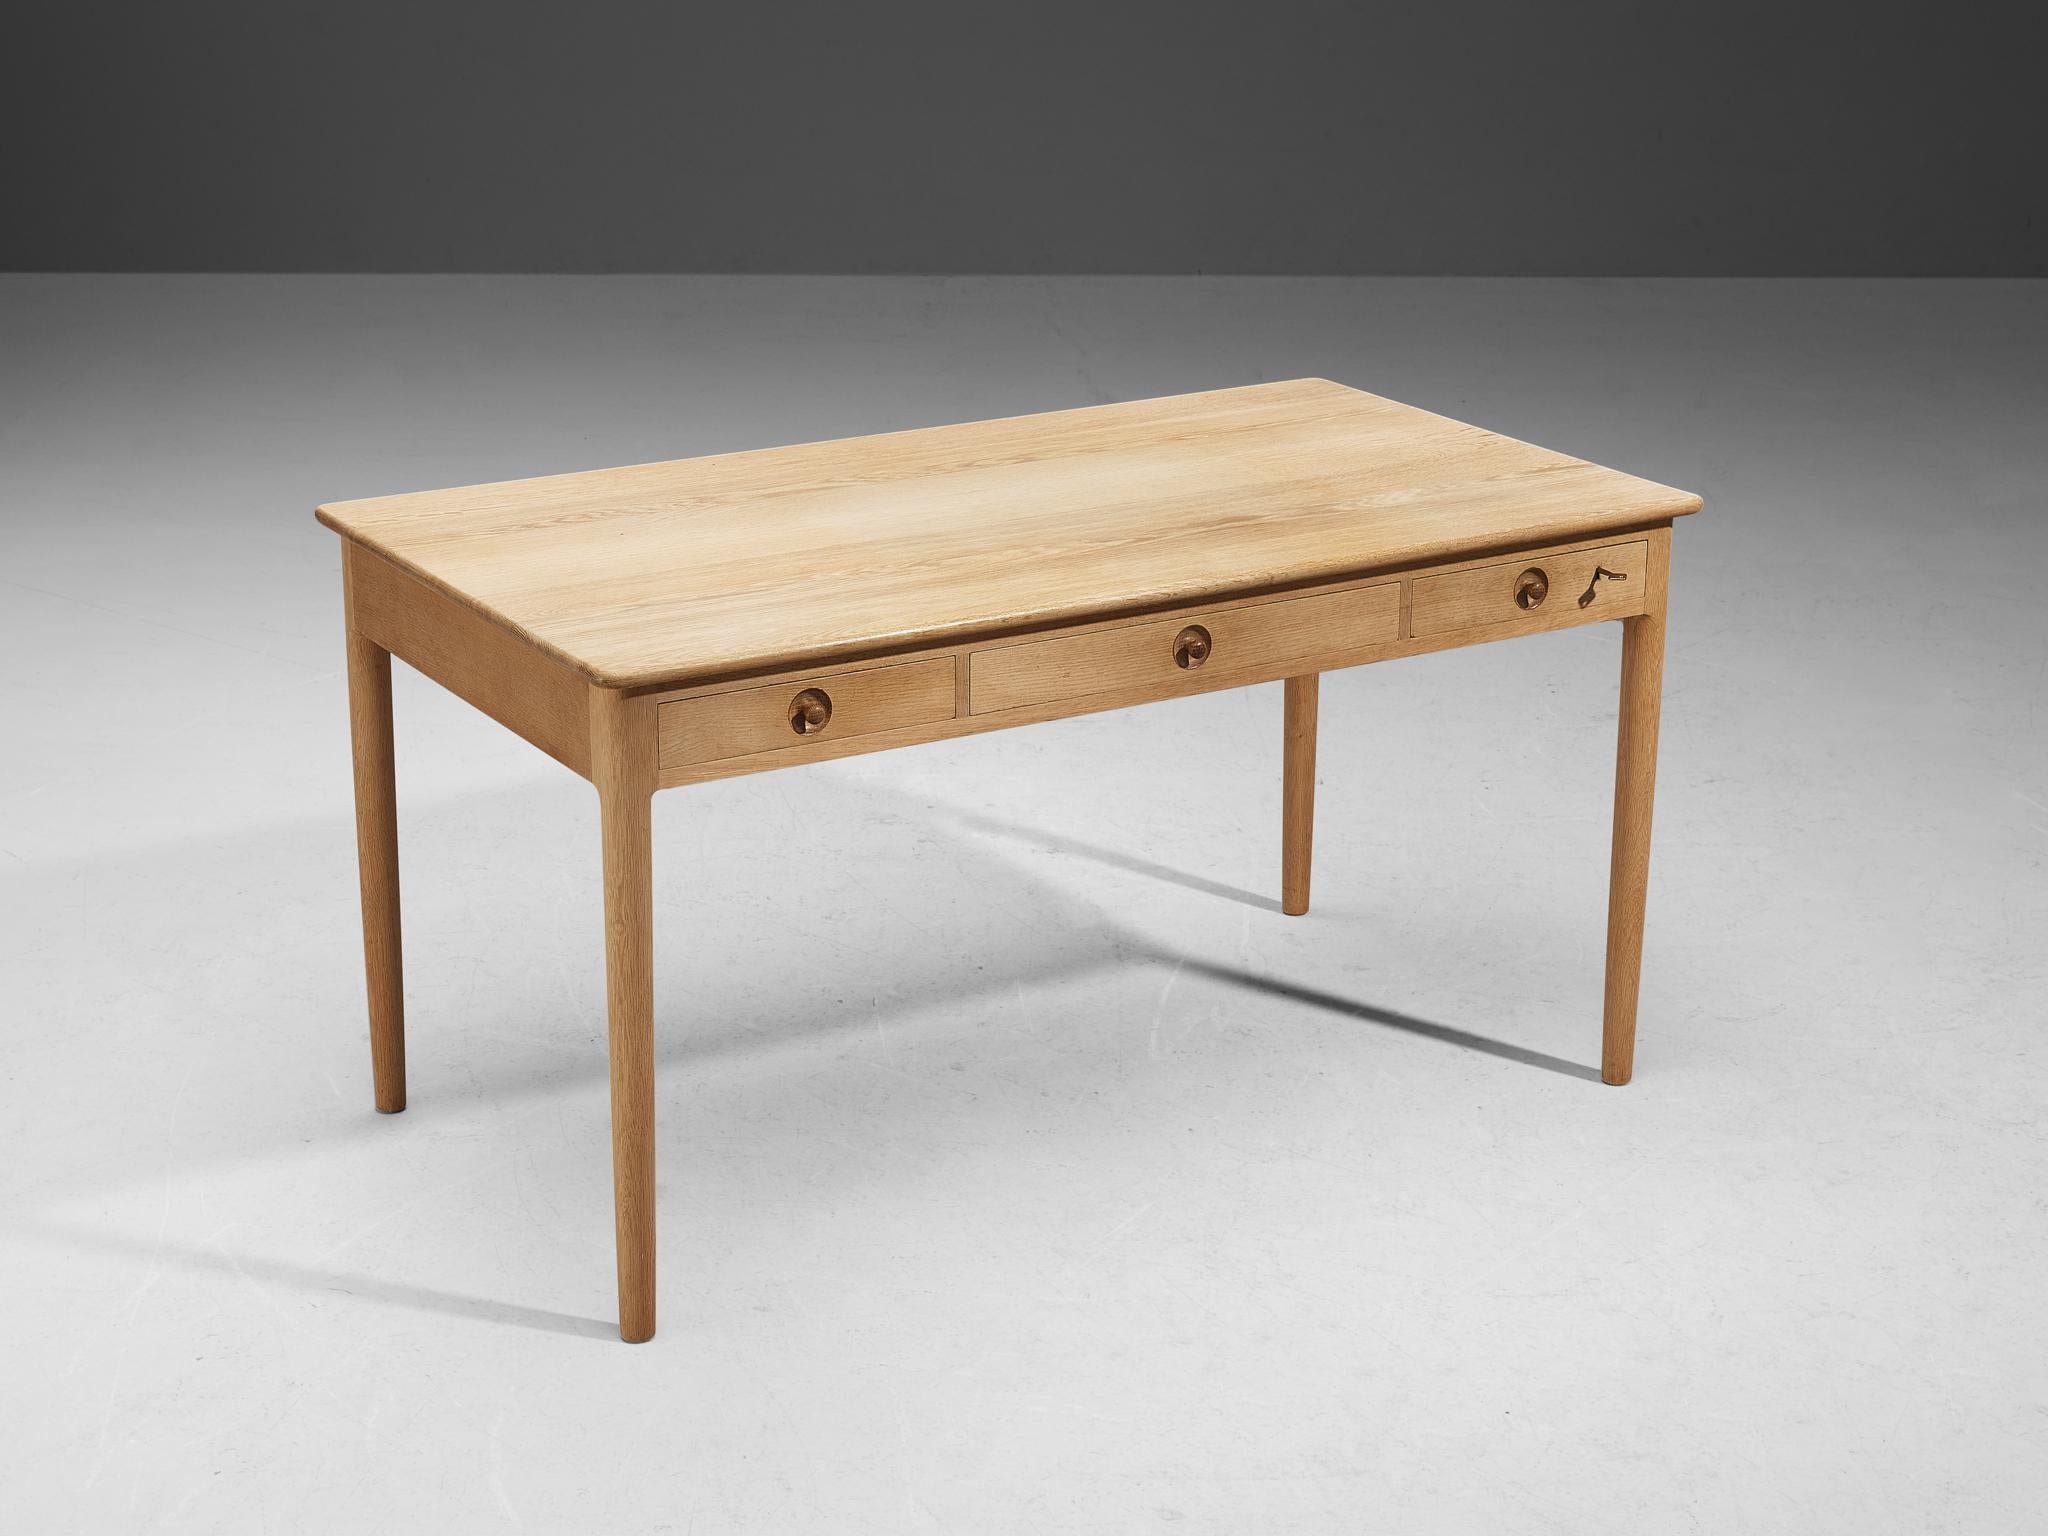 Hans J. Wegner for Andreas Tuck, 'AT 305' desk, oak, Denmark, design 1953

Elegant and slim desk designed by Hans Wegner and constructed by Andreas Tuck in the 1970s. The wood used to manufacture this desk is a stunningly fresh and beautiful oak